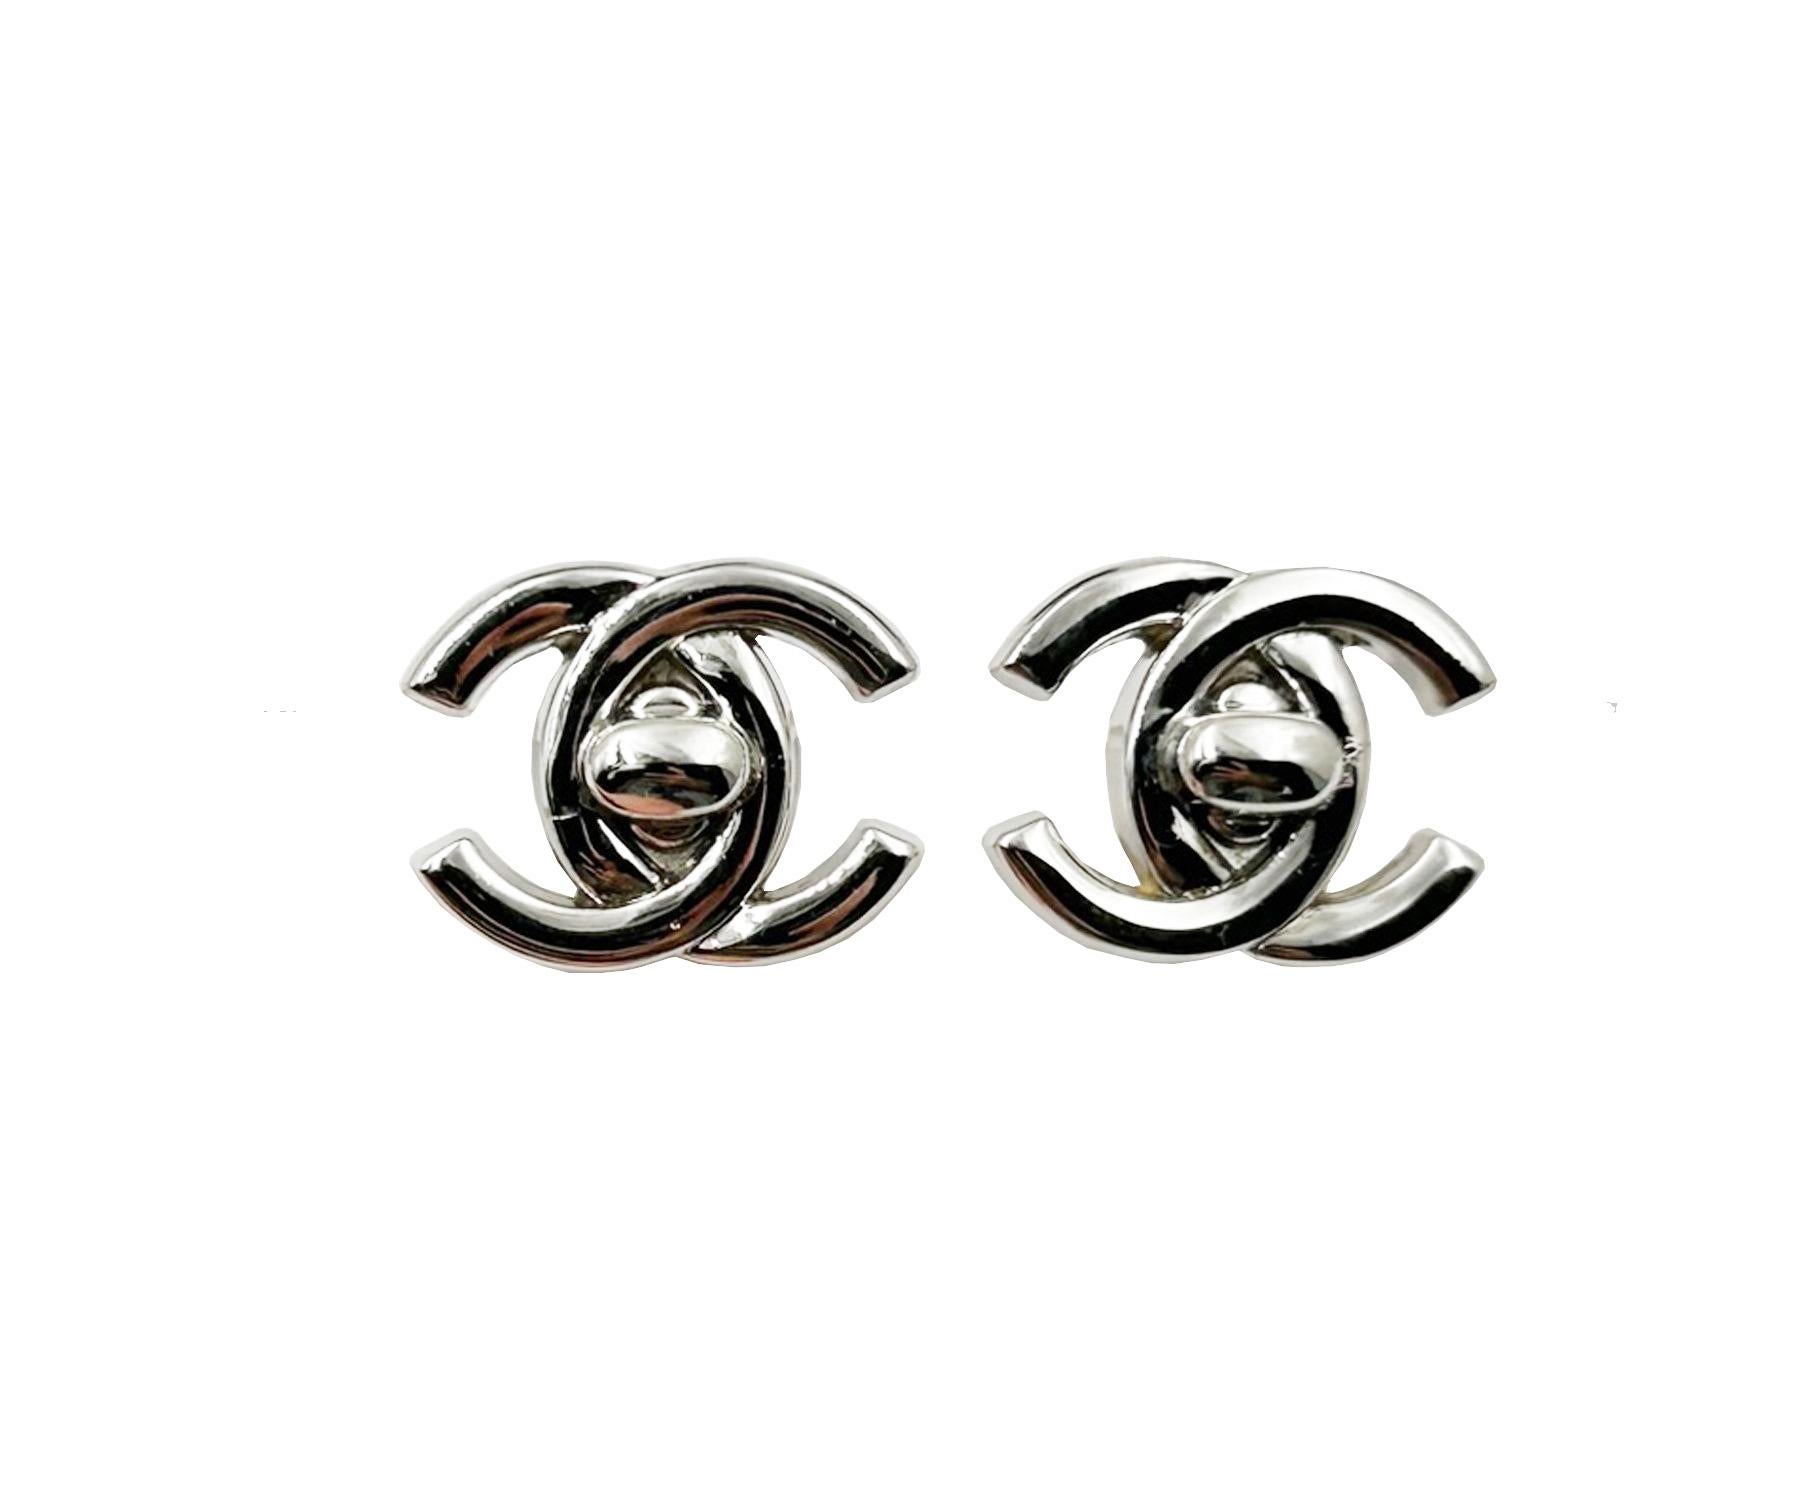 Chanel Vintage Silver CC Turnlock Clip on Earrings

* Marked 95
* Made in France
* Comes with the original box

-It is approximately 0.9